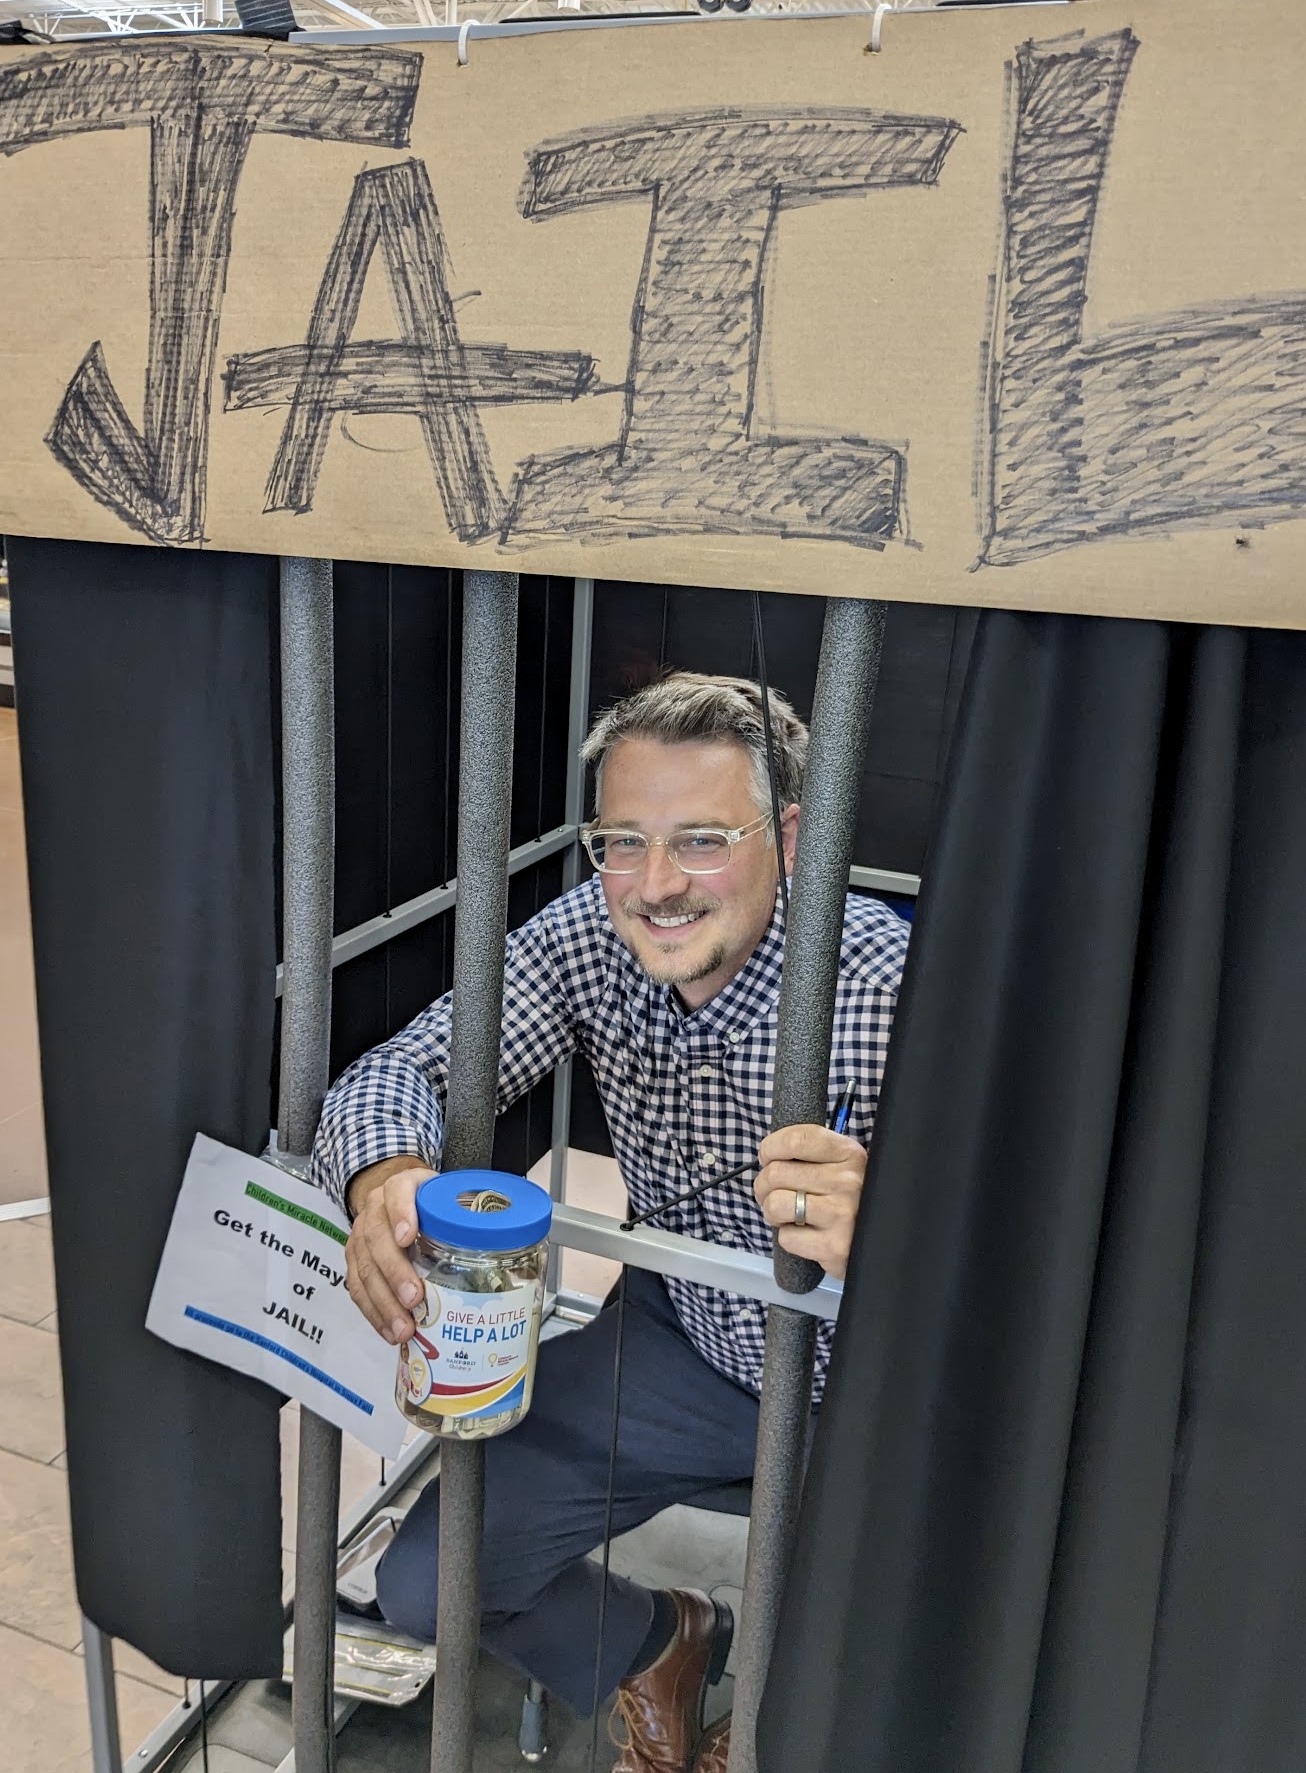 Aberdeen Mayor Travis Schaunaman served time in "jail" Thursday, July 13 attempting to collect $2,000 for the Children's Miracle Network. His "cell" was just inside the main entrance at Walmart. Aberdeen Insider photo by Scott Waltman